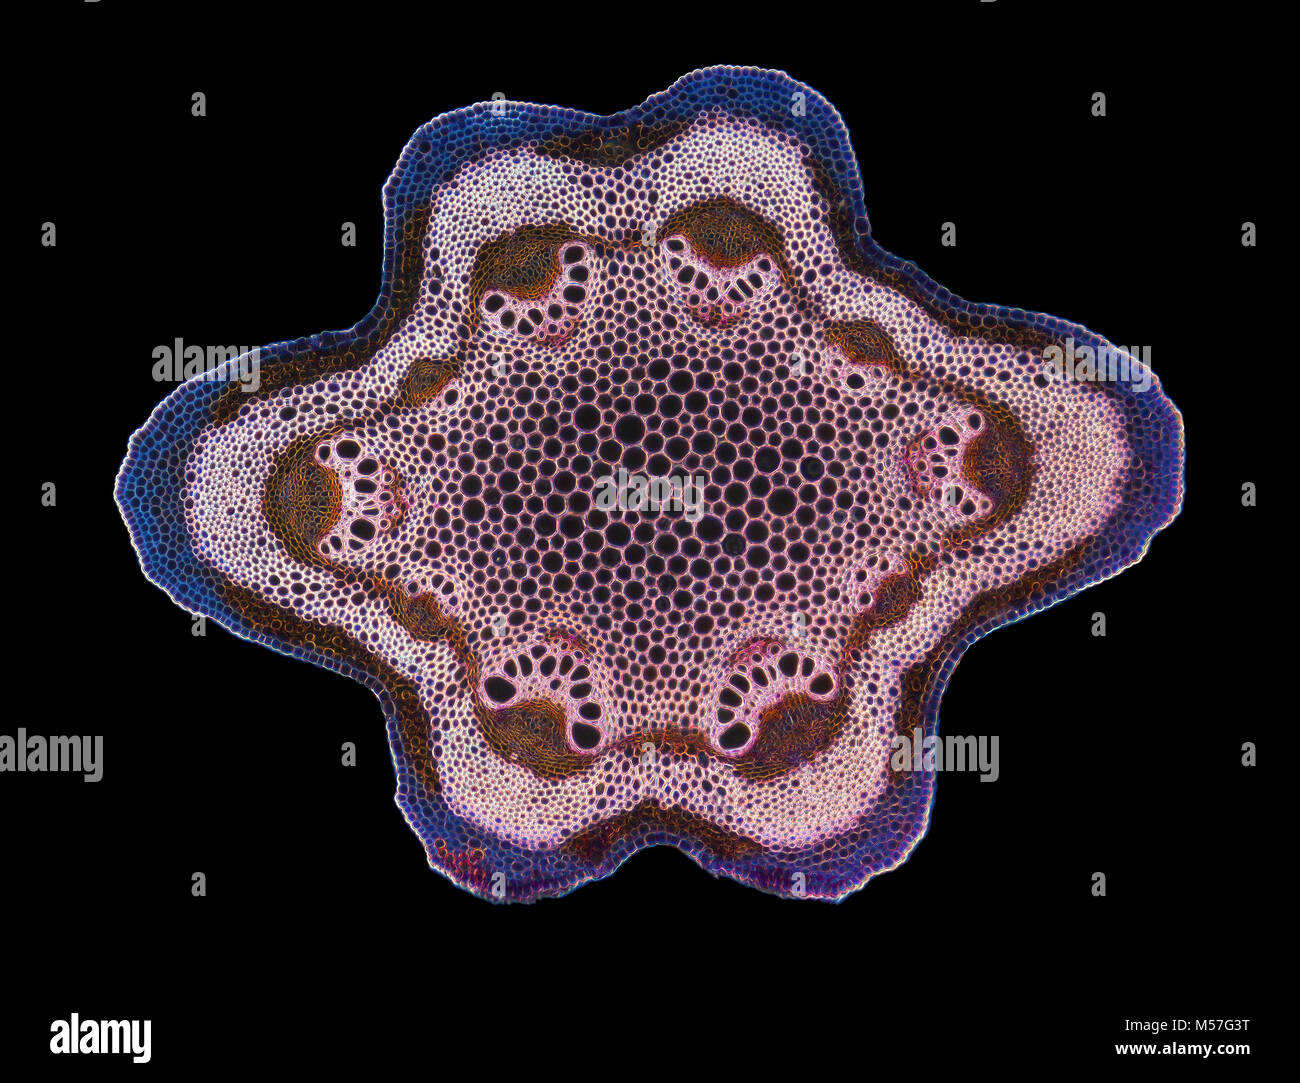 Clematis sp. stem, TS. Darkfield photomicrograph, Stock Photo